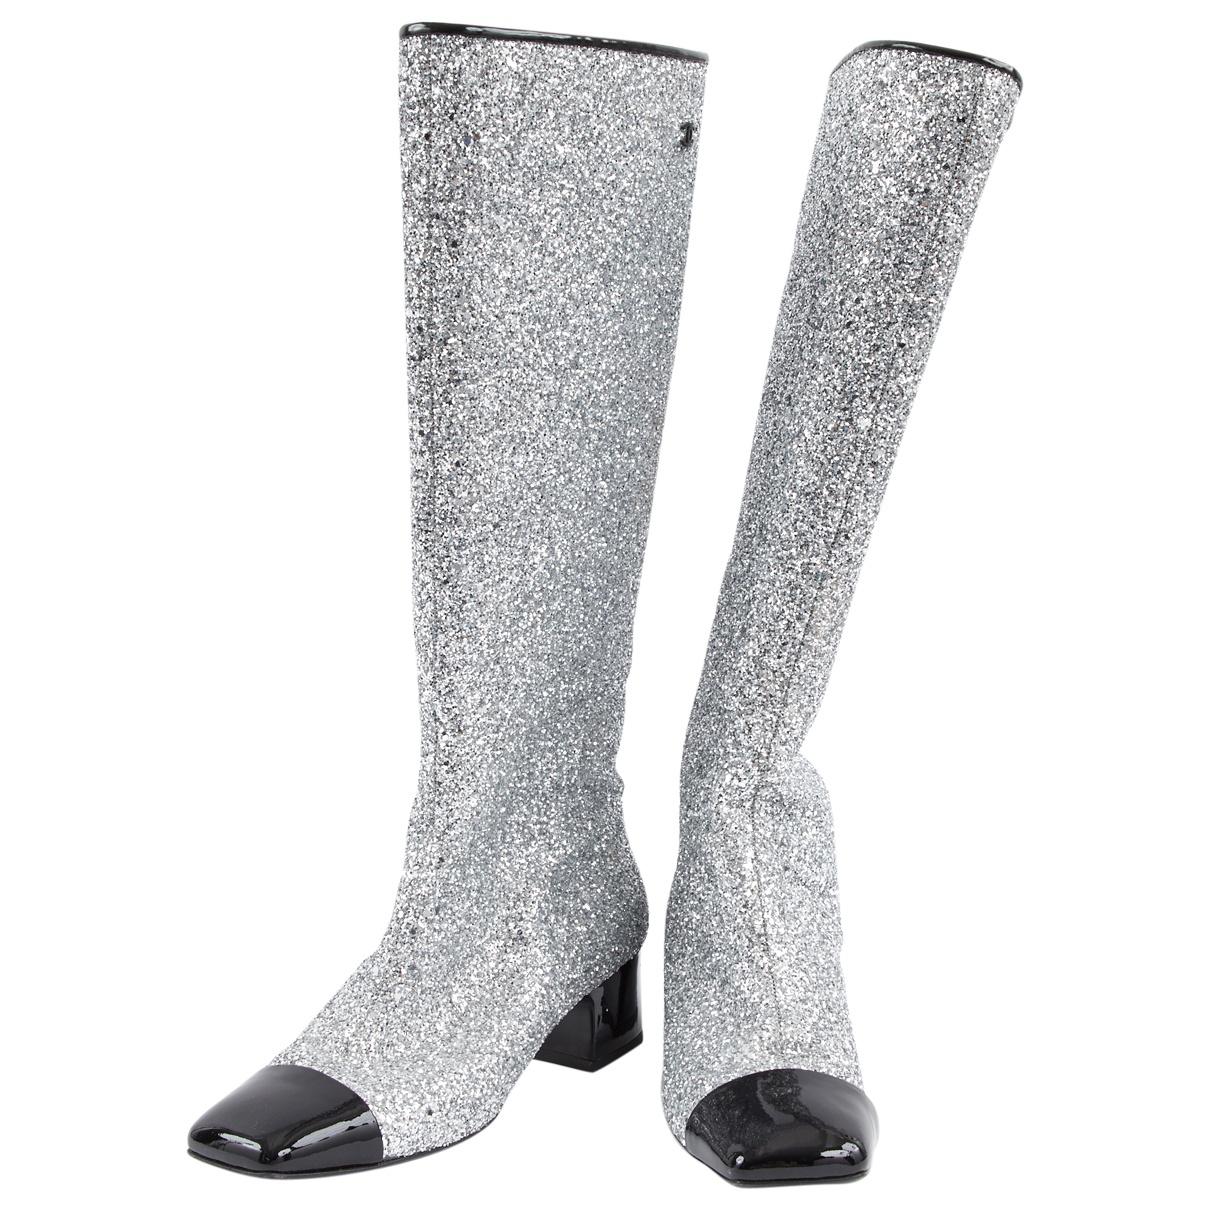 Chanel Glitter Riding Boots in Silver 